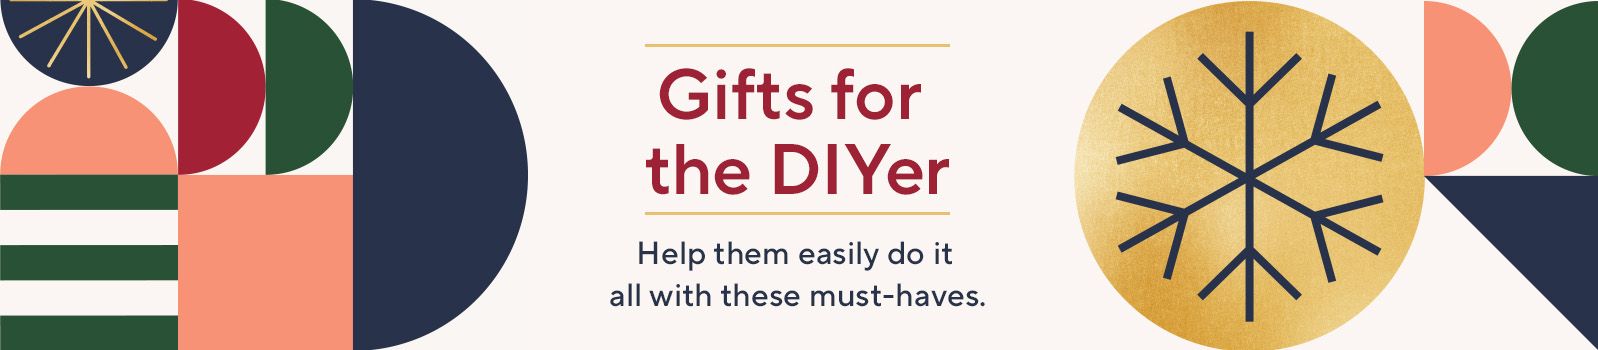 Gifts for the DIYer - Help them easily do it all with these must-haves.